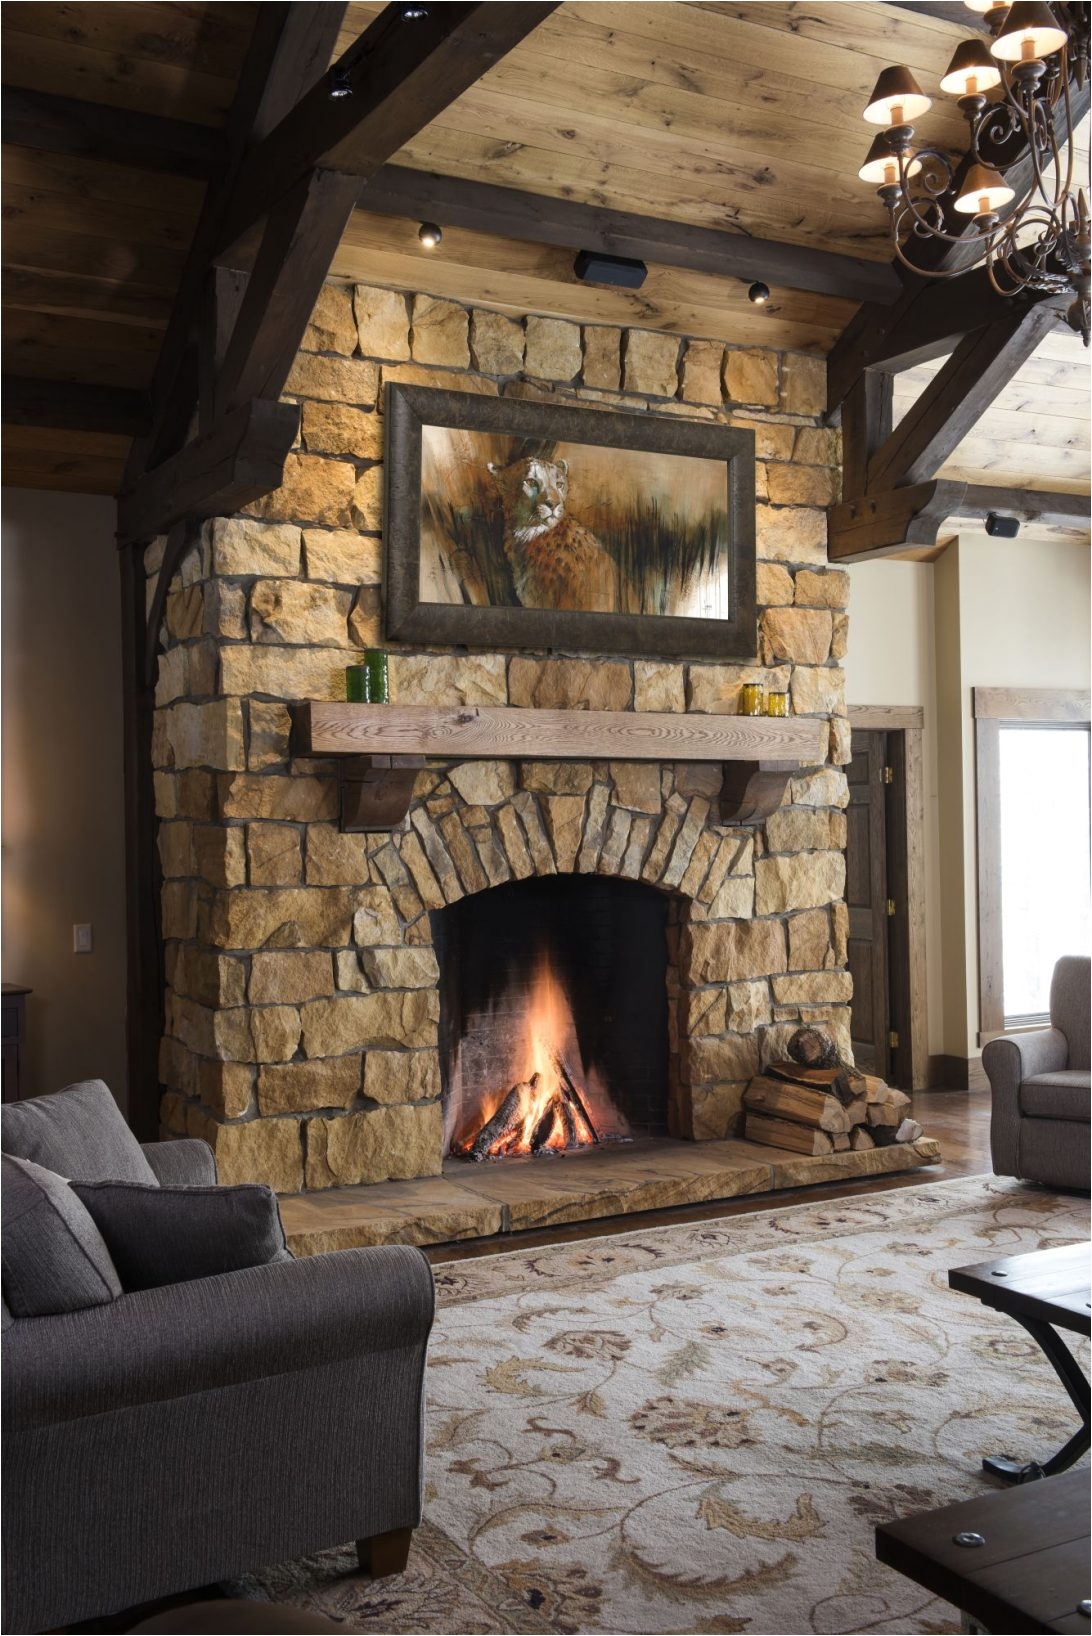 Rumford Fireplace Kit Prices 83 Most Matchless Rumford Style Fireplace Wood Insert Shallow Build